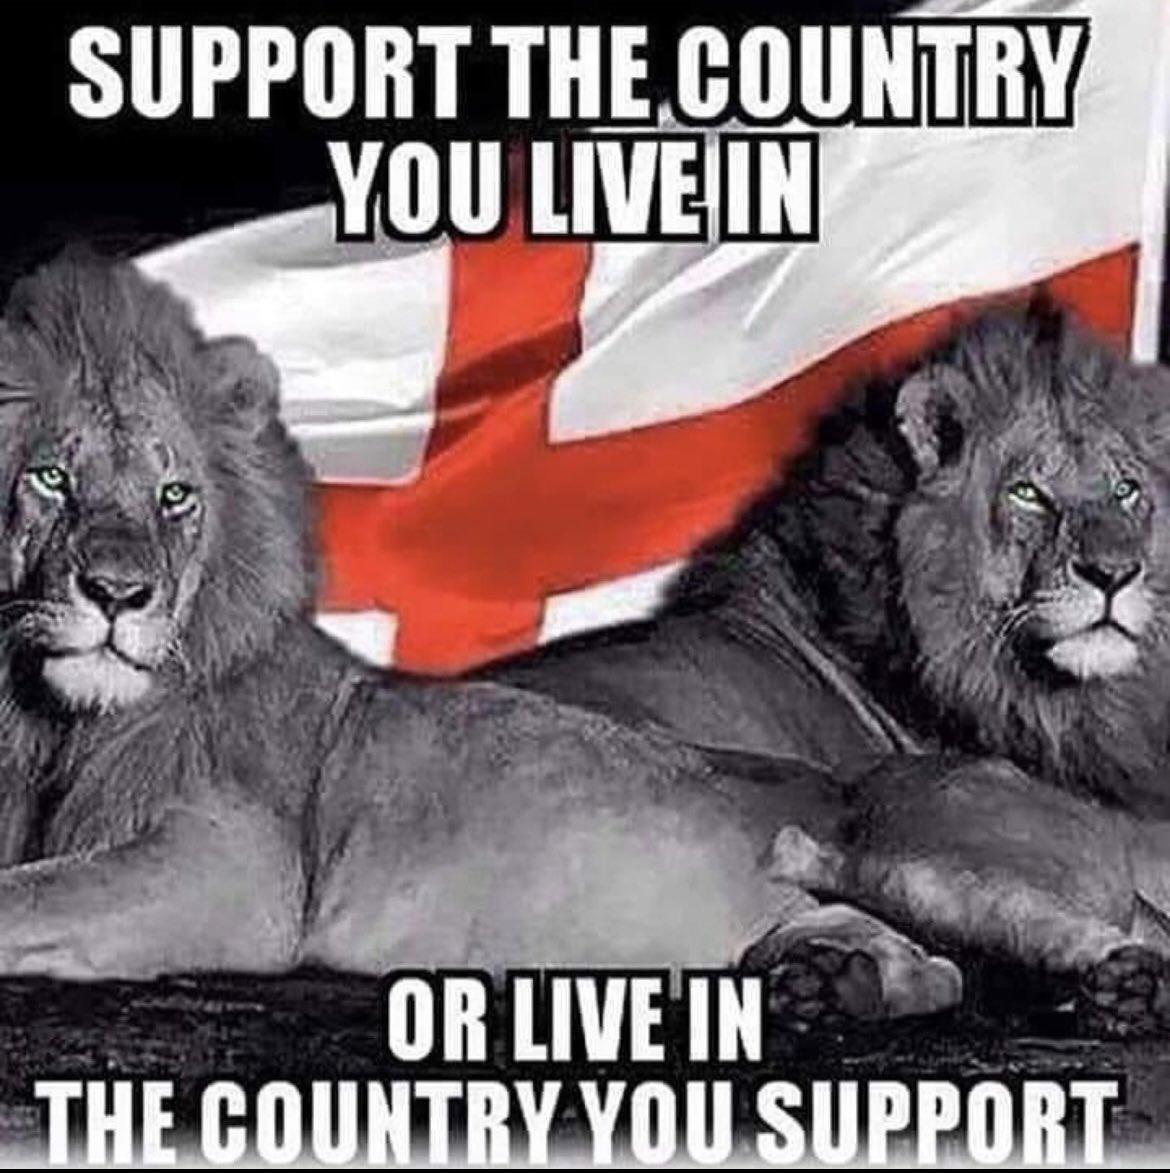 Click if you think this should apply to all Muslim’s & other immigrants that come here! Support it or LEAVE! It should be THE No1 criteria of being able to live in this country!! 🇬🇧 @JamesCleverly